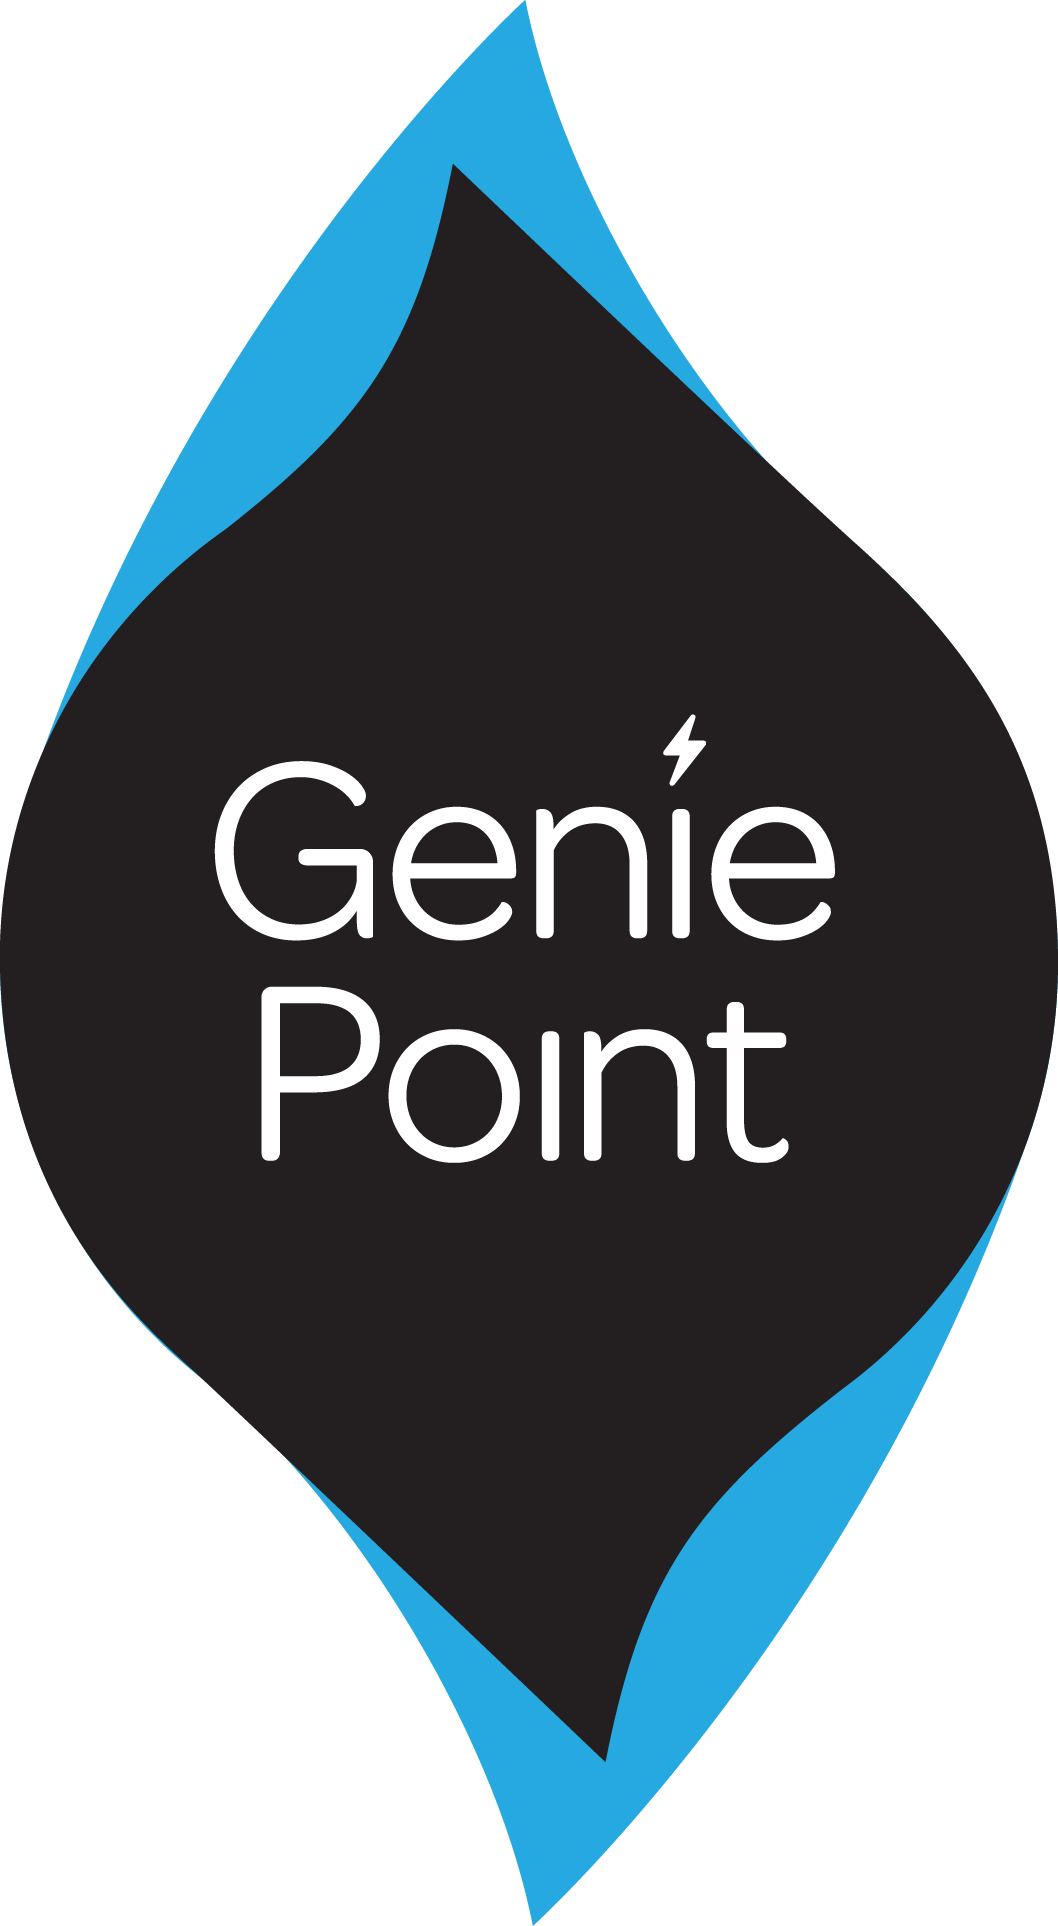 The GeniePoint Network